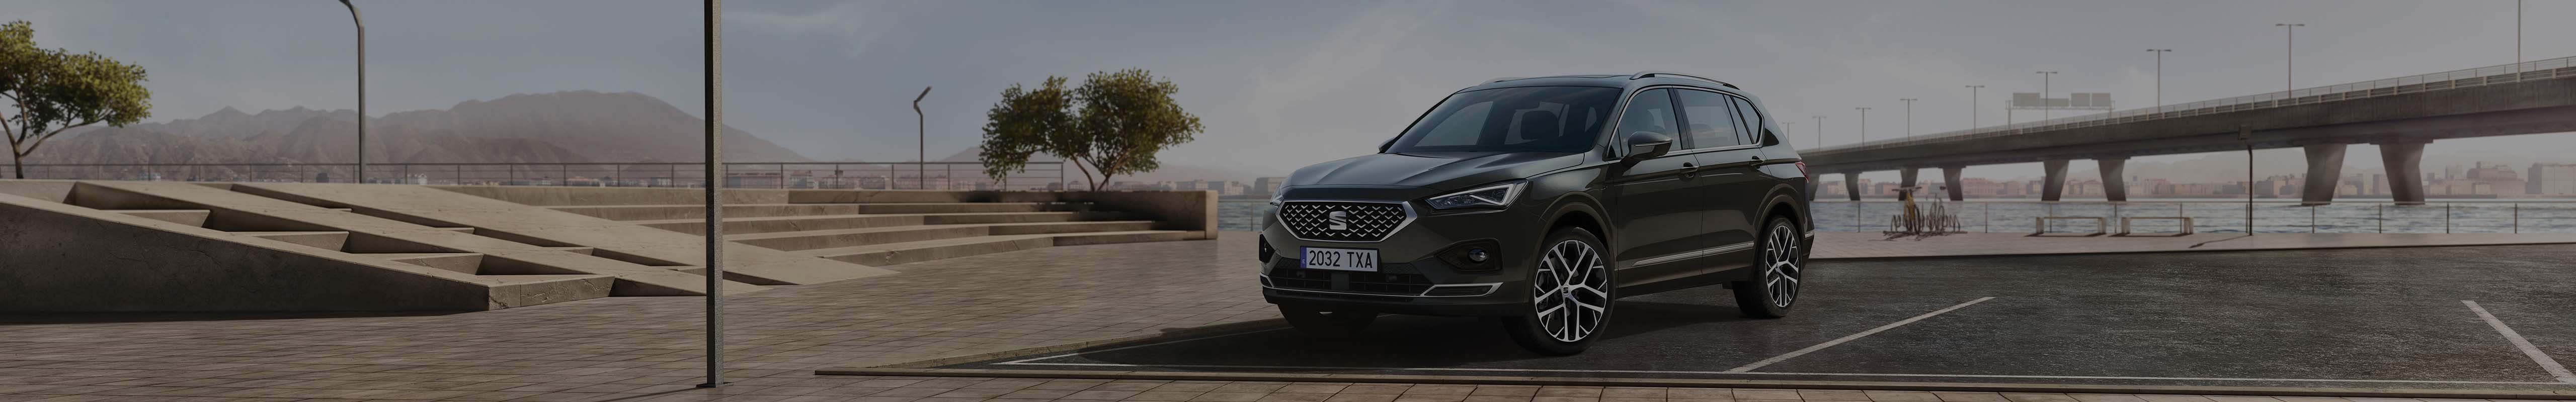 Right view of the SEAT Tarraco XPERIENCE Dark Camouflage colour in a parking lot